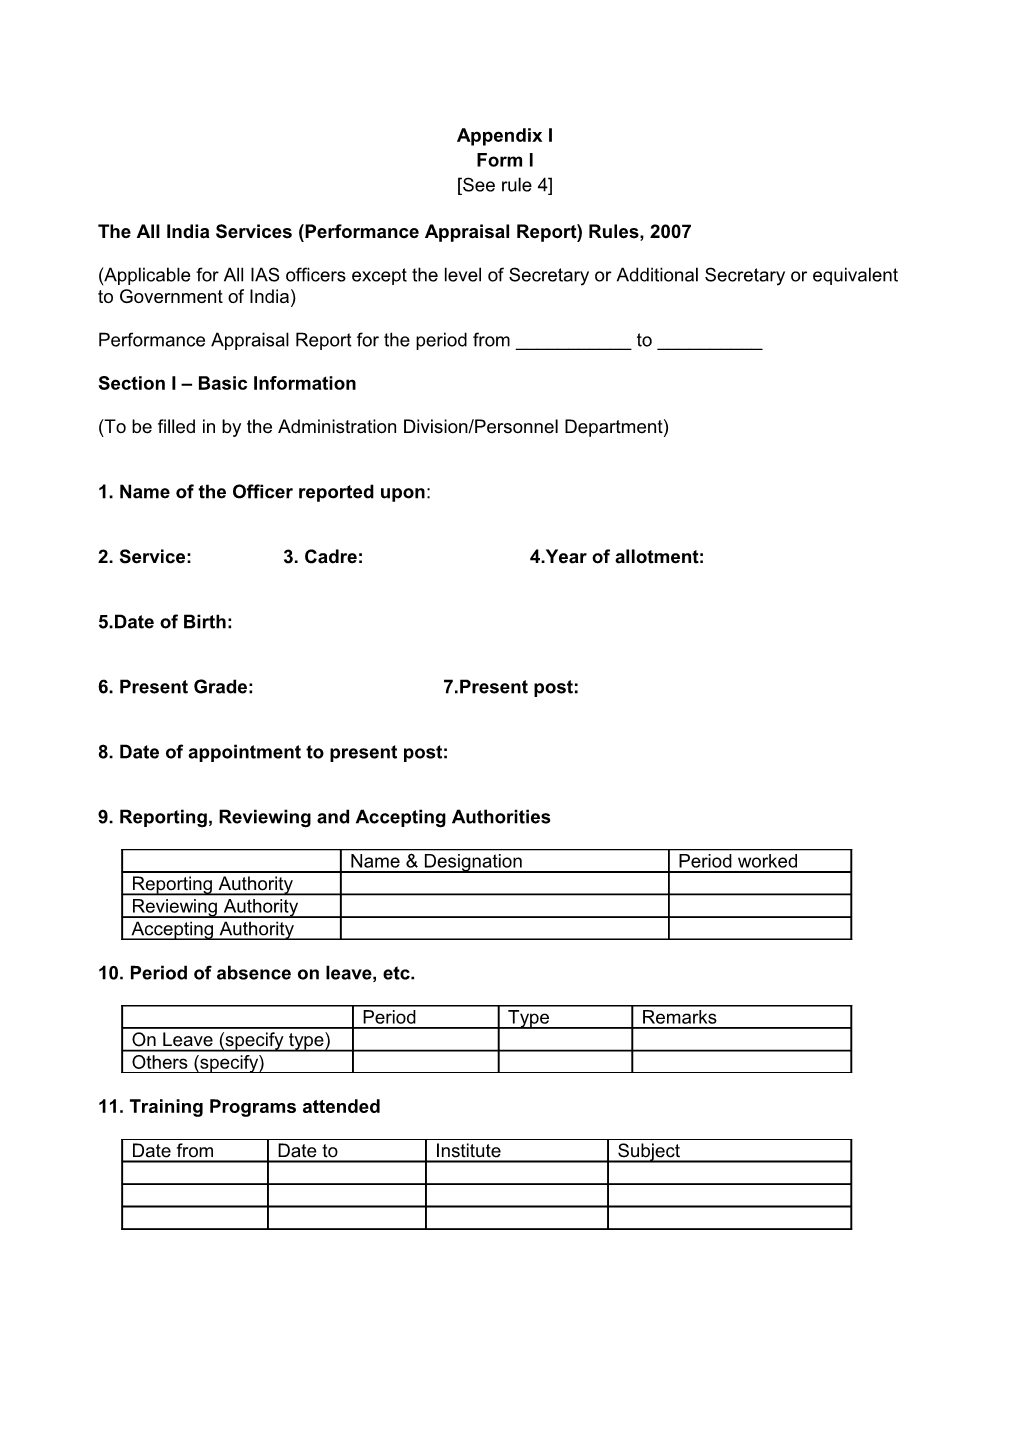 The All India Services (Performance Appraisal Report) Rules, 2007